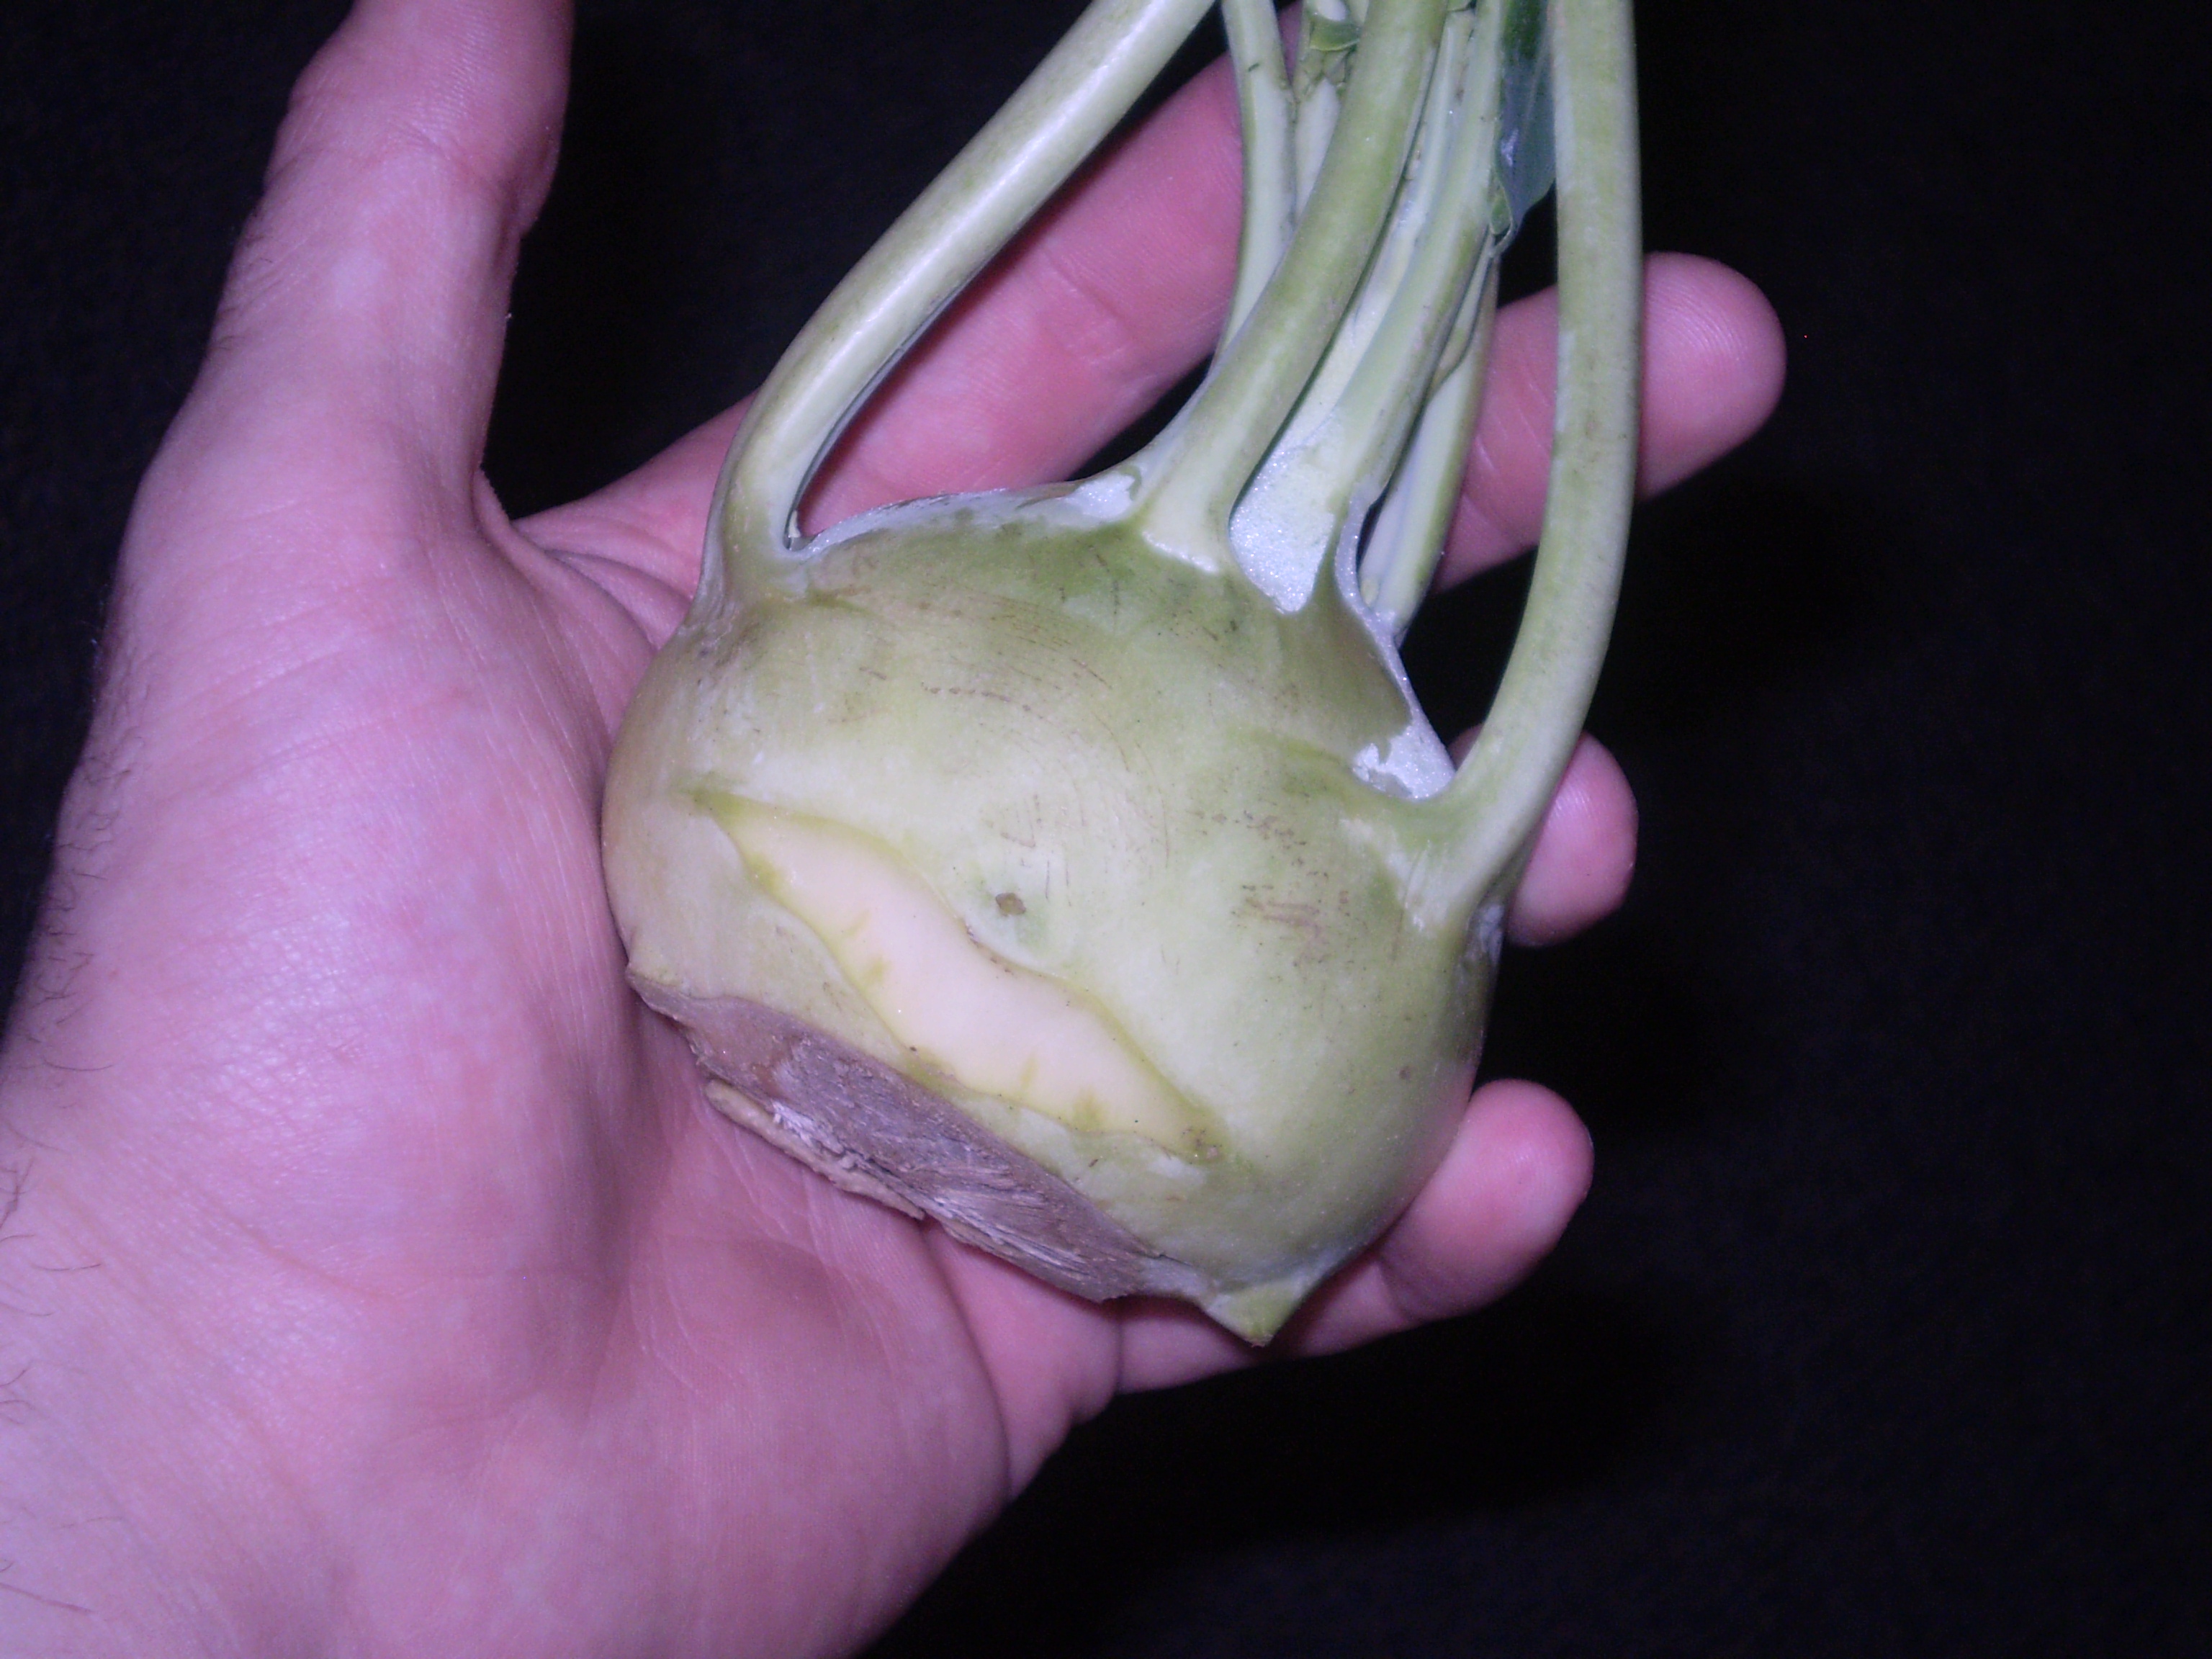 The end product - A Kohlrabi (taken by myself)